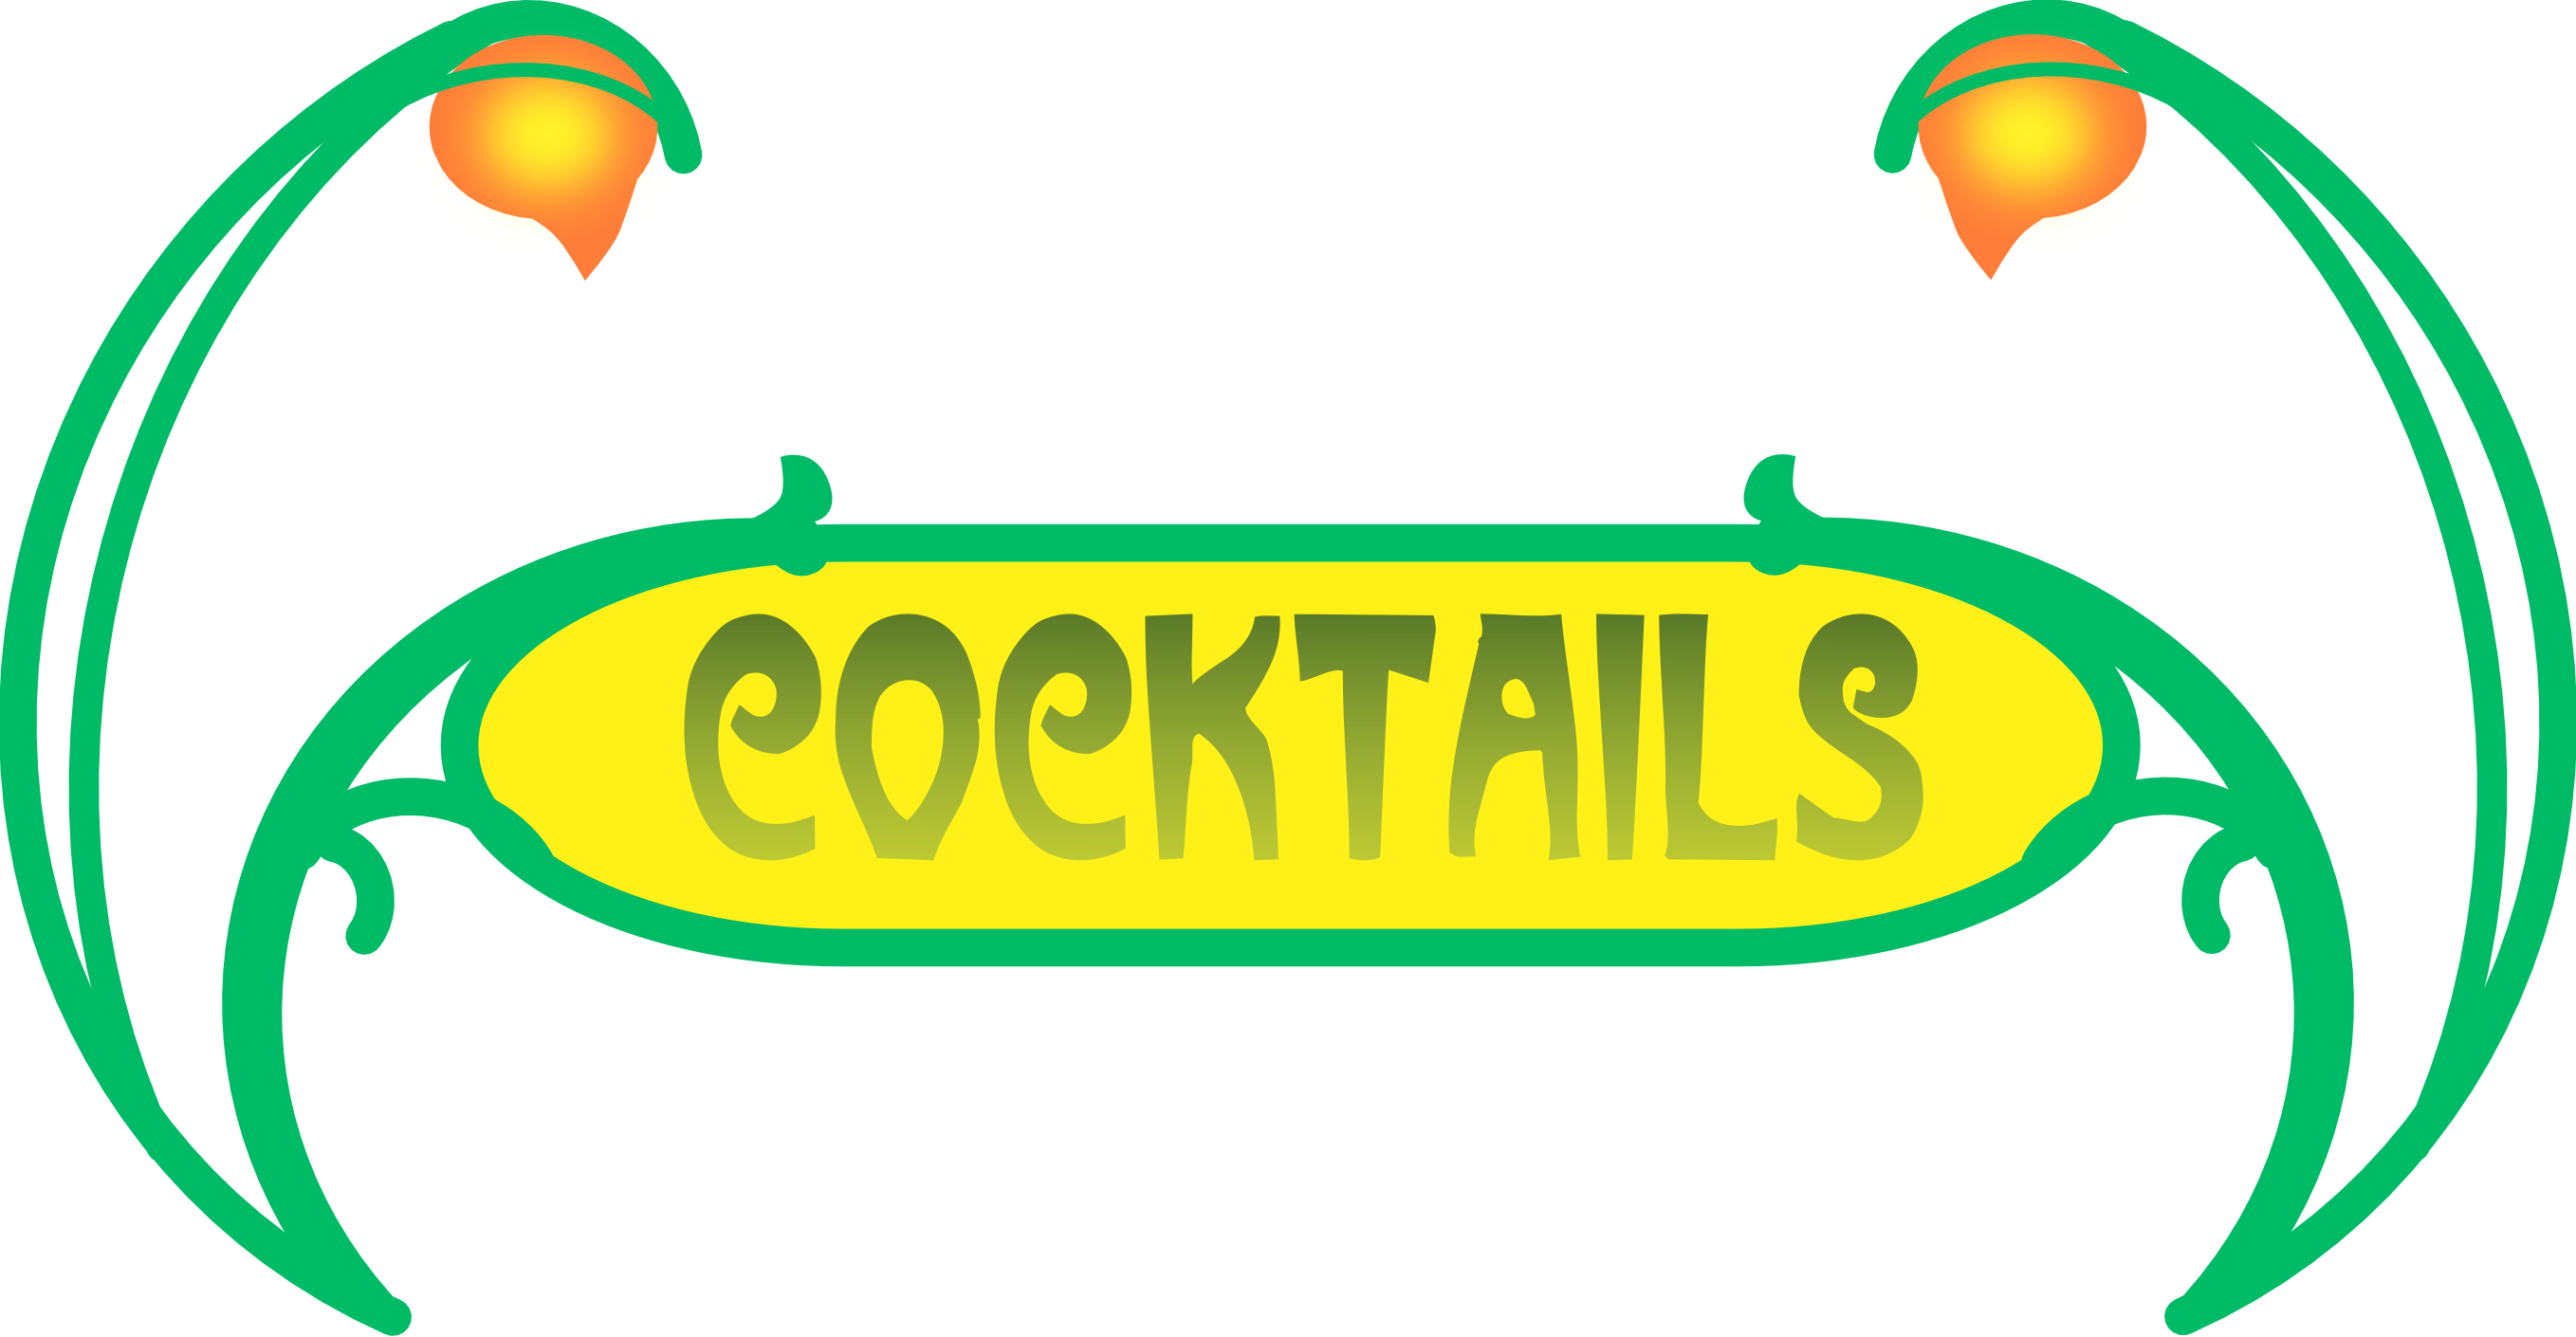 Cocktail Graphic - high res